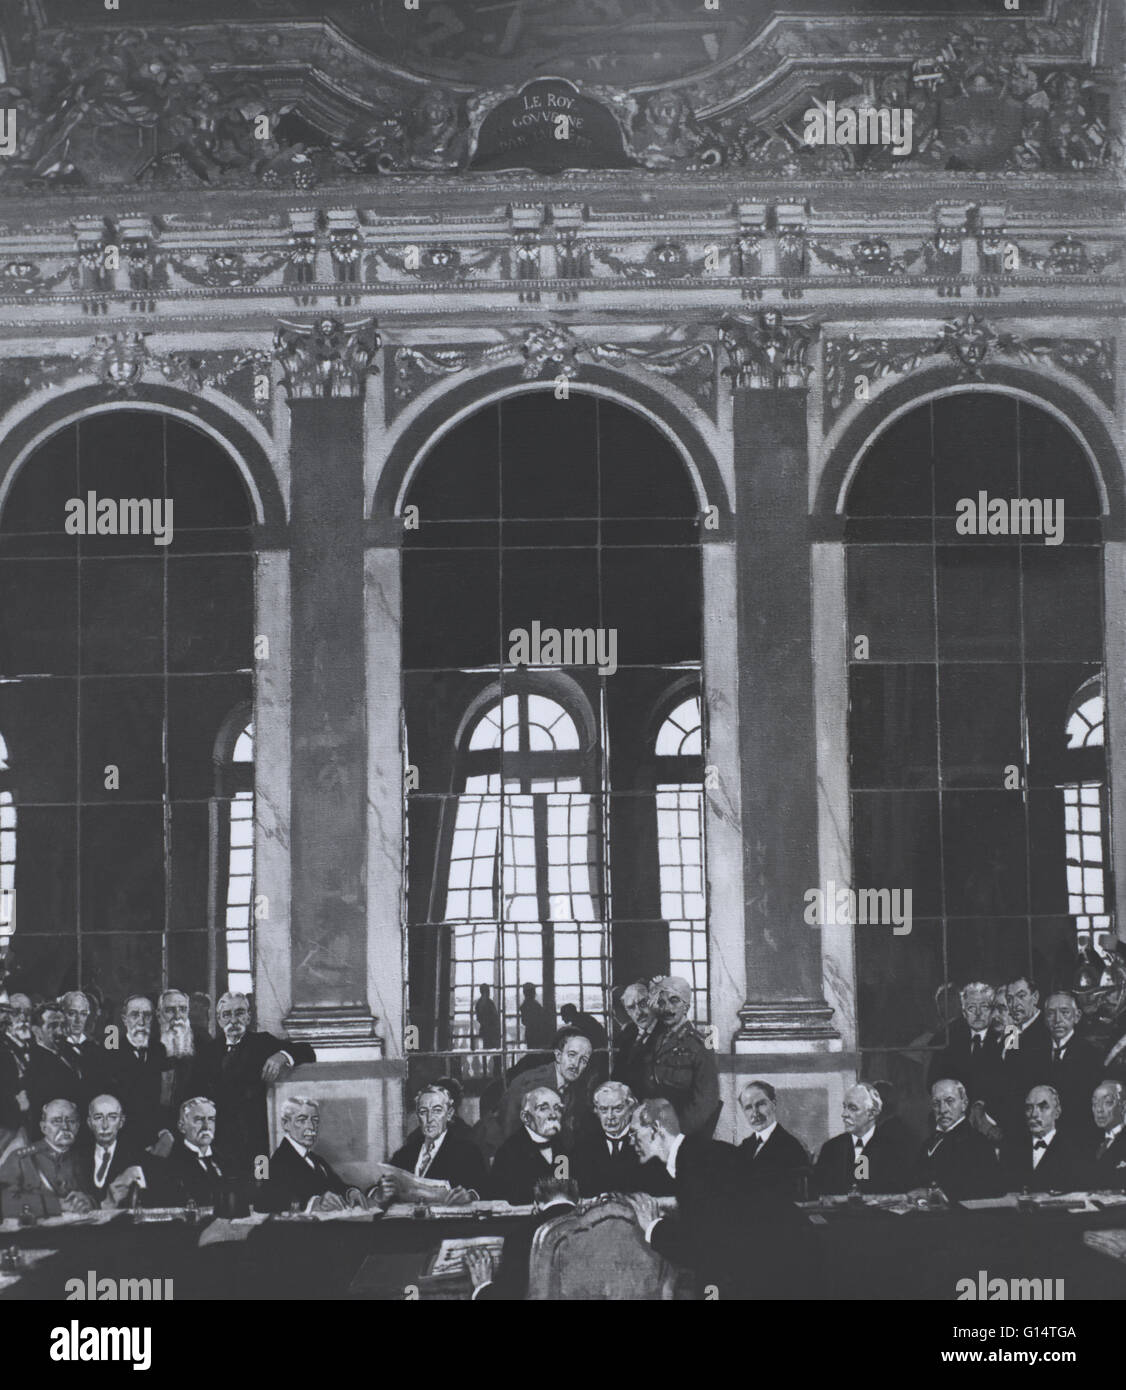 The signing of the Treaty of Versailles in the Hall of Mirrors, painted by Sir William Orpen. Stock Photo